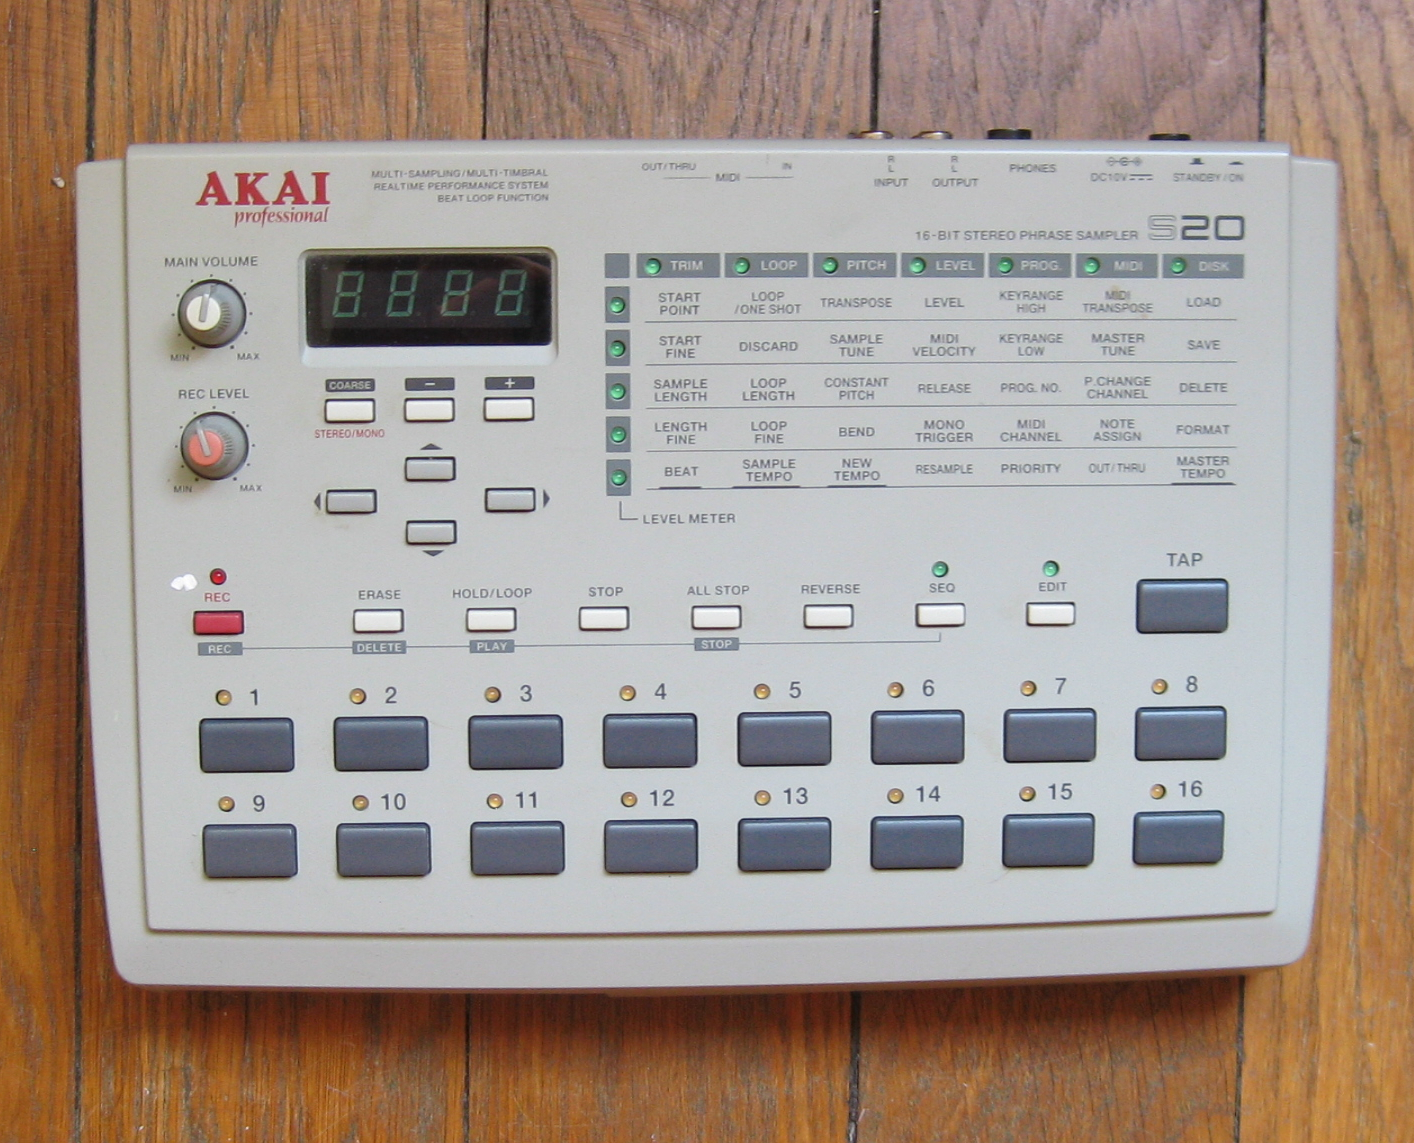 Dope Machines You Didn't Know Existed: AKAI S20 (Sampler)